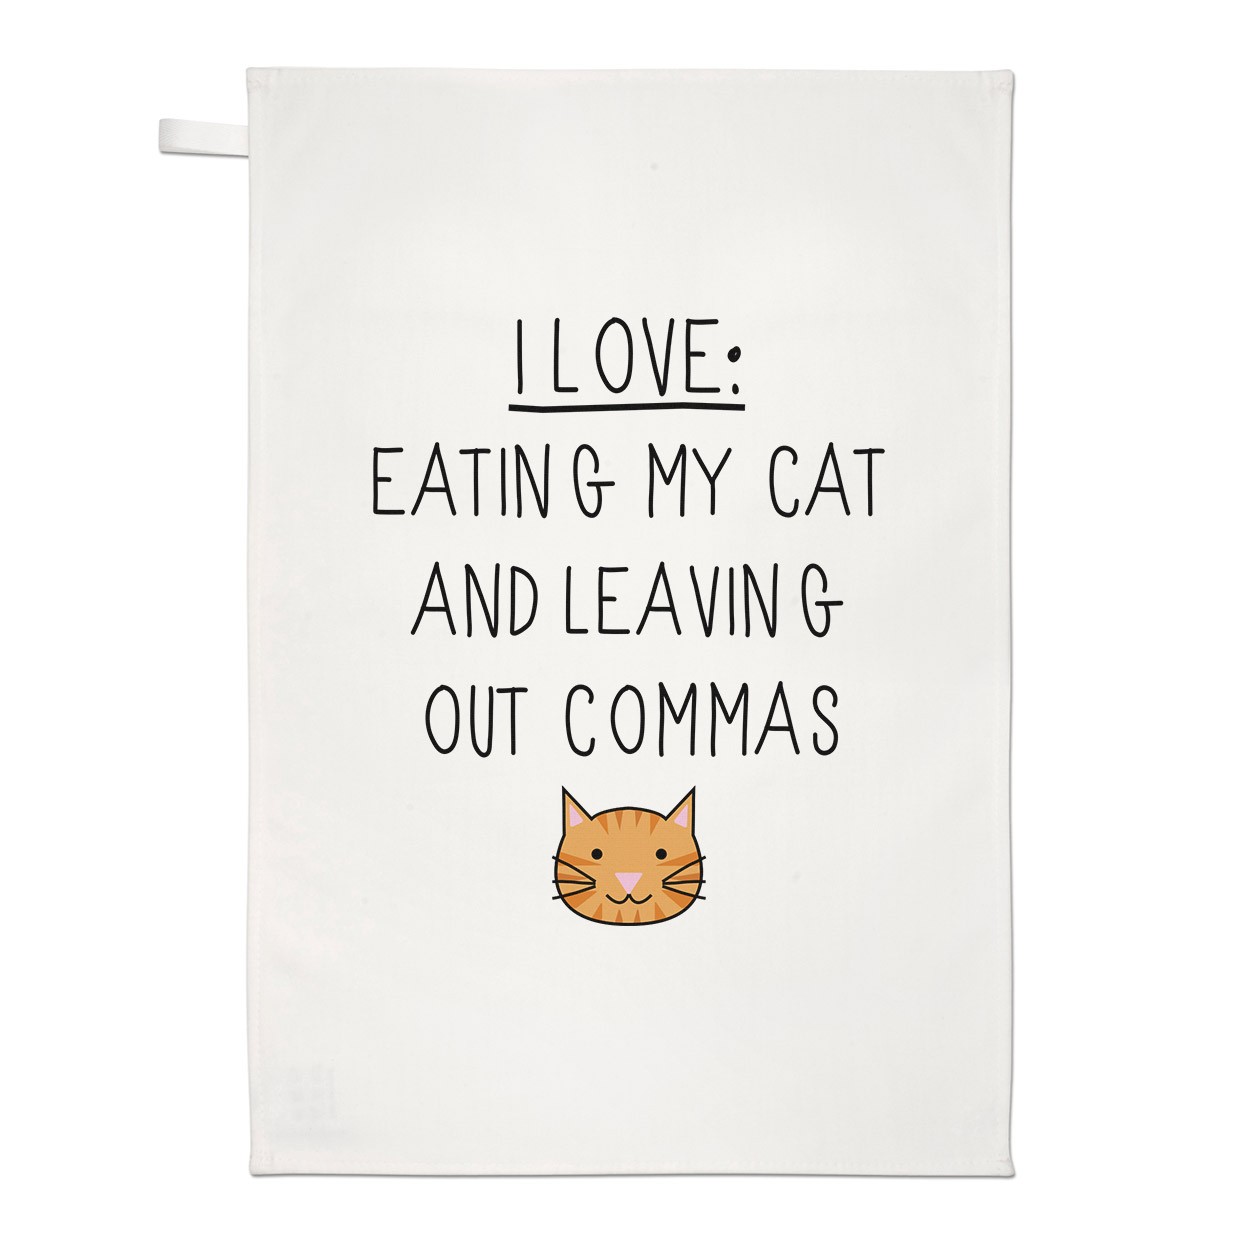 I Love Eating My Cat and Leaving Out Commas Tea Towel Dish Cloth